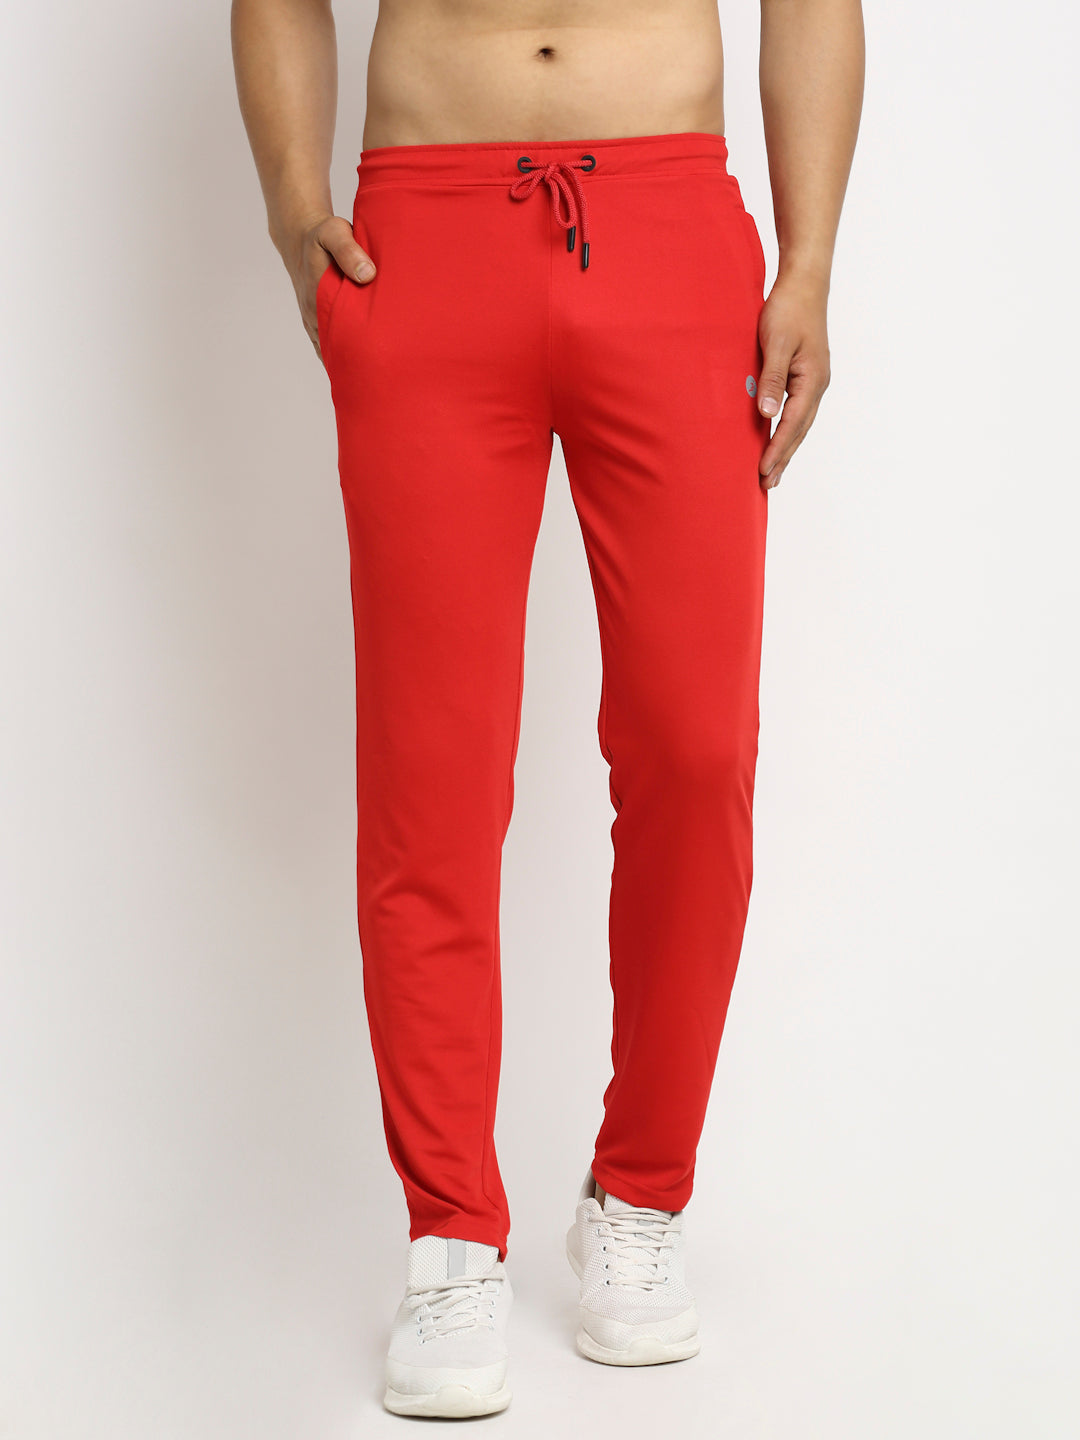 Mens Red Cotton Solid Casual Joggers